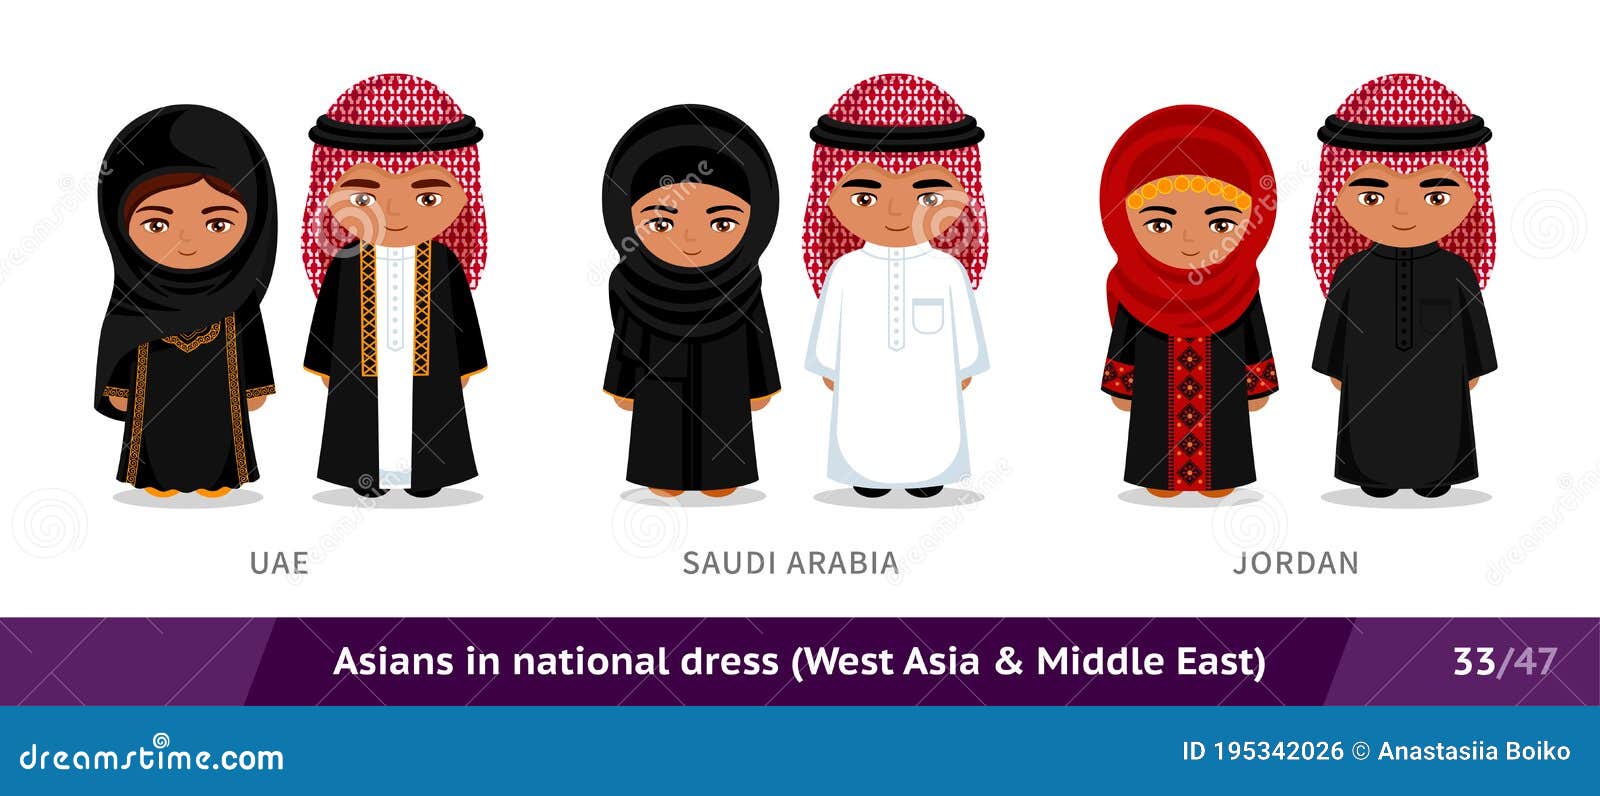 SAUDI ARABIA. Challenging the state, women wear their abayas inside out